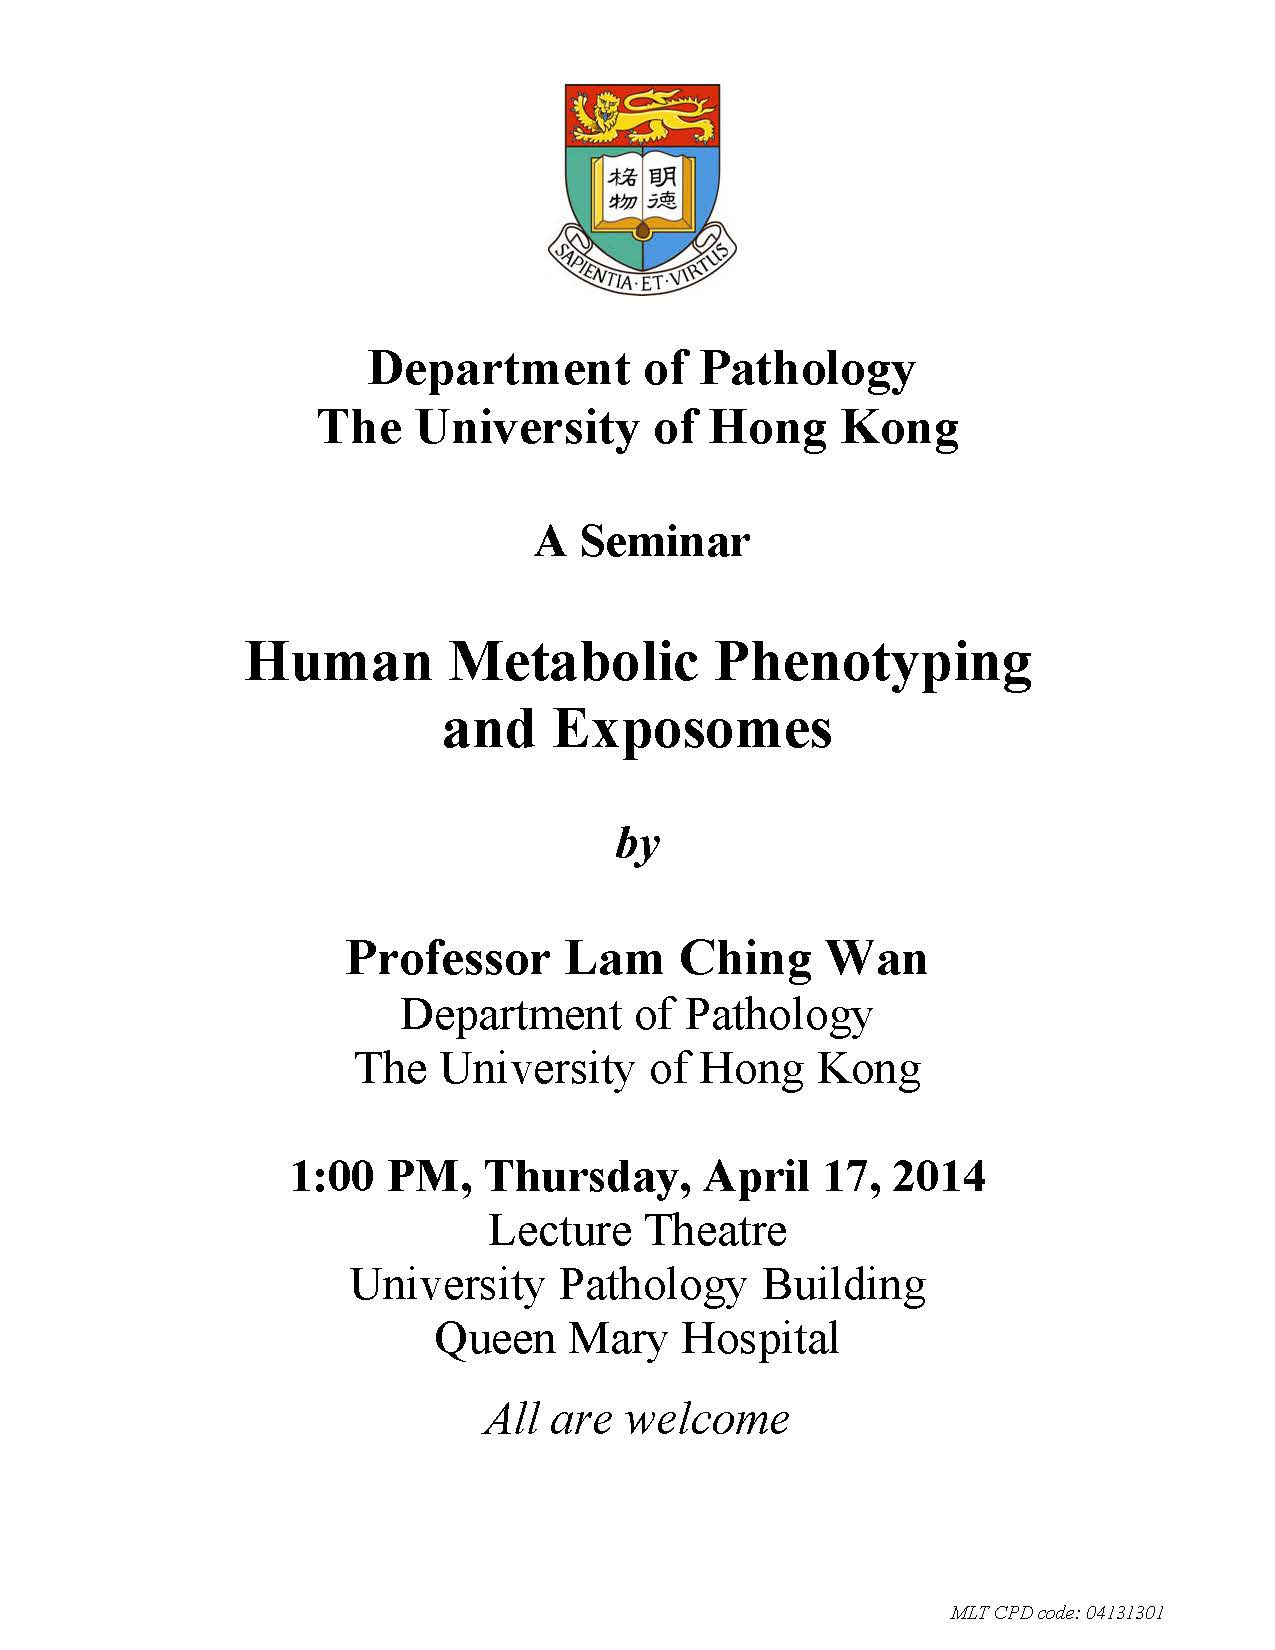 A Seminar on Human Metabolic Phenotyping and Exposomes by  Professor Lam Ching Wan